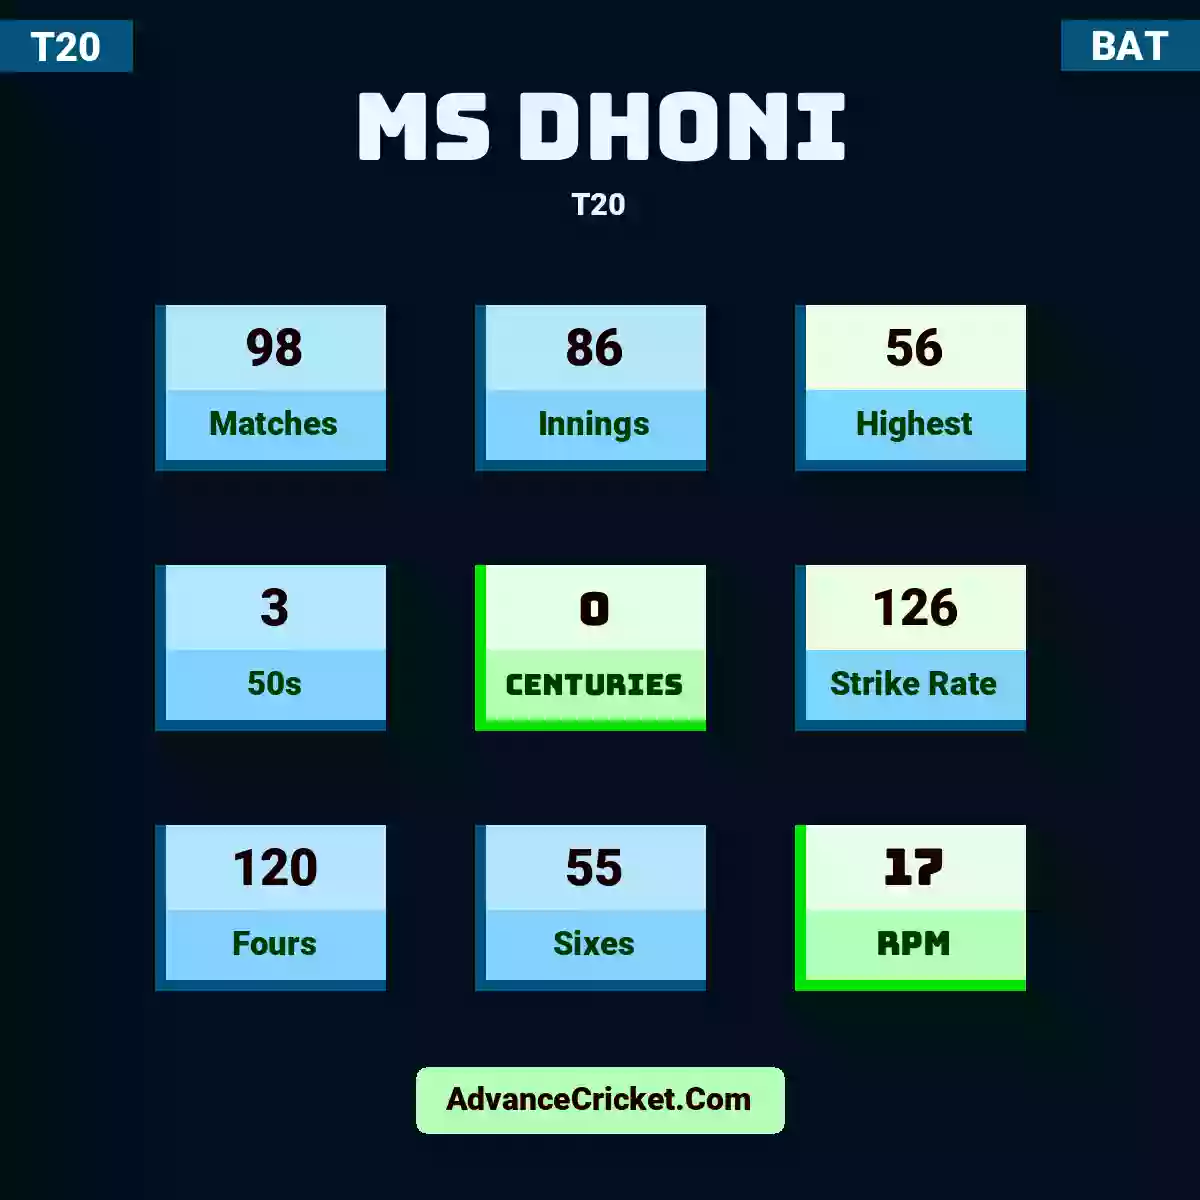 MS Dhoni T20 , MS Dhoni played 98 matches, scored 56 runs as highest, 3 half-centuries, and 0 centuries, with a strike rate of 126. M.Dhoni hit 120 fours and 55 sixes, with an RPM of 17.